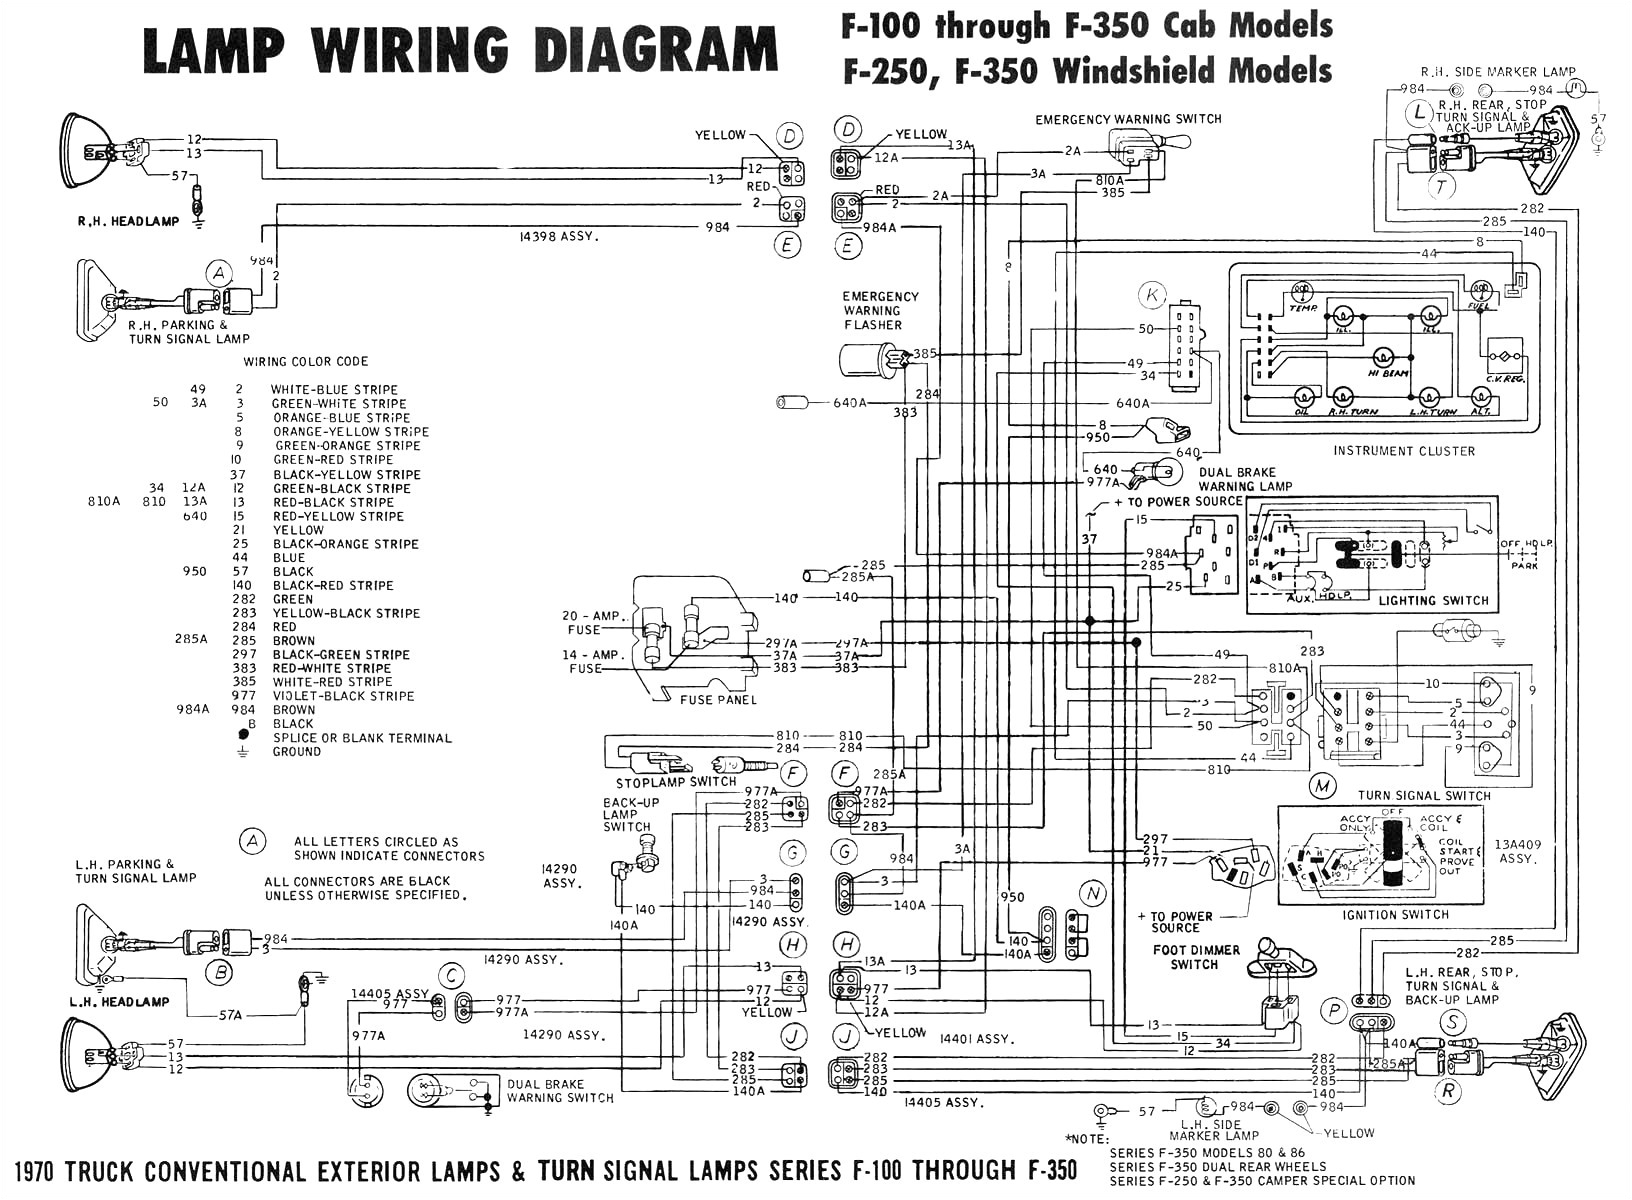 2016 ford f 250 wiring diagram wiring diagram post 2016 ford f250 wiring diagram 2015 ford